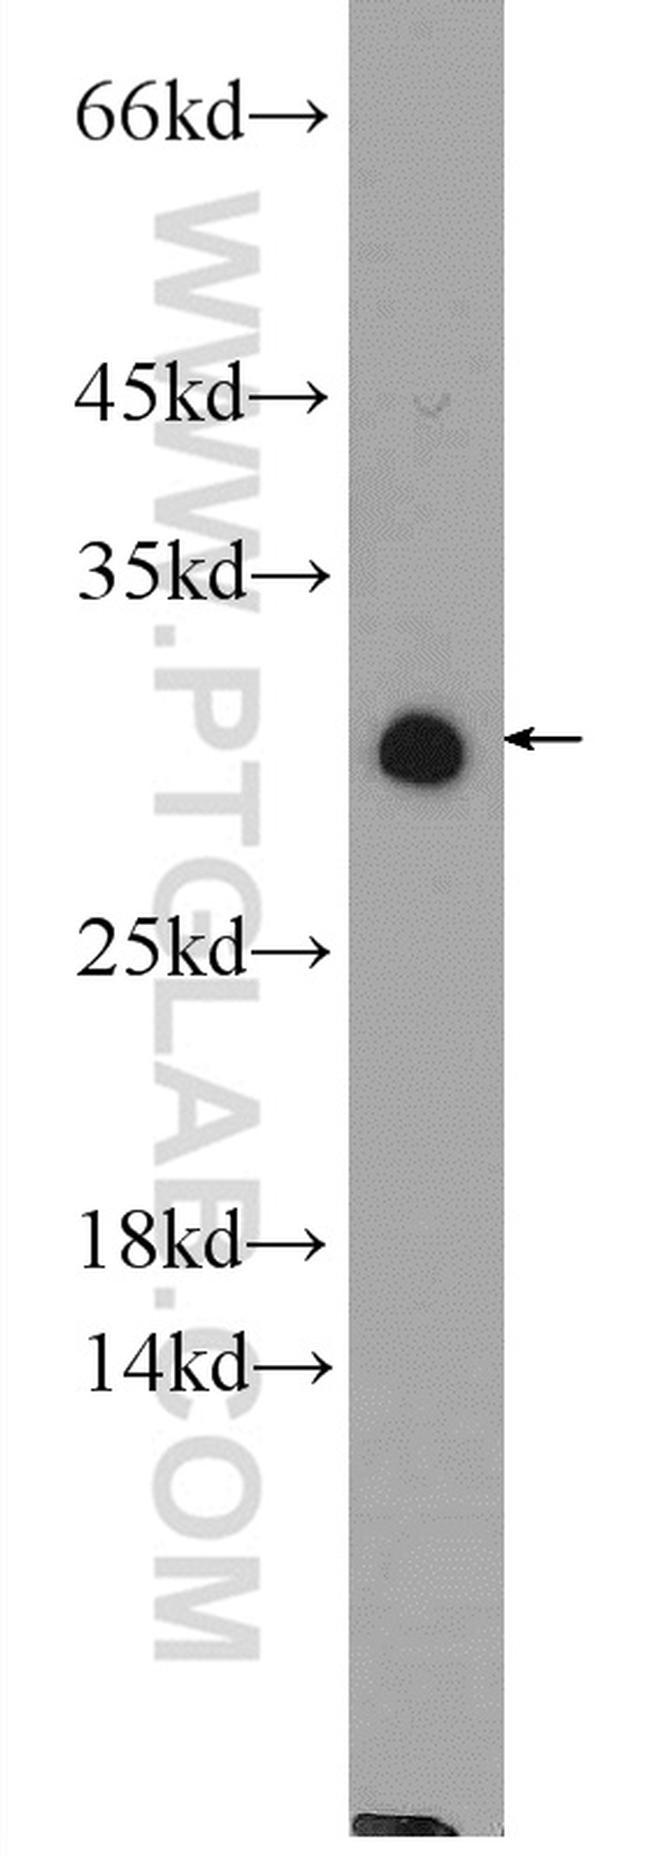 NUP62CL Antibody in Western Blot (WB)